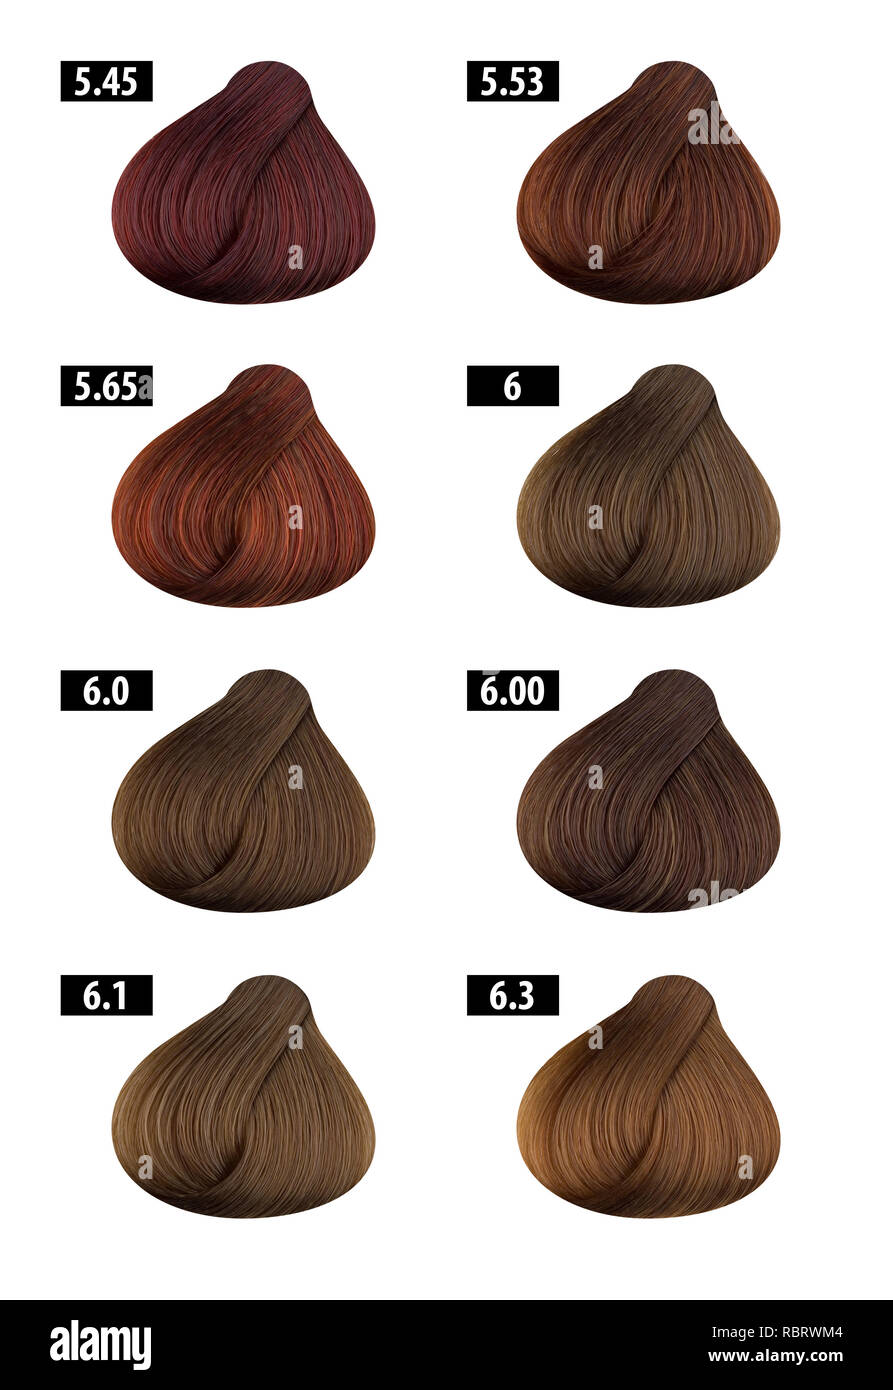 brown hair color chart